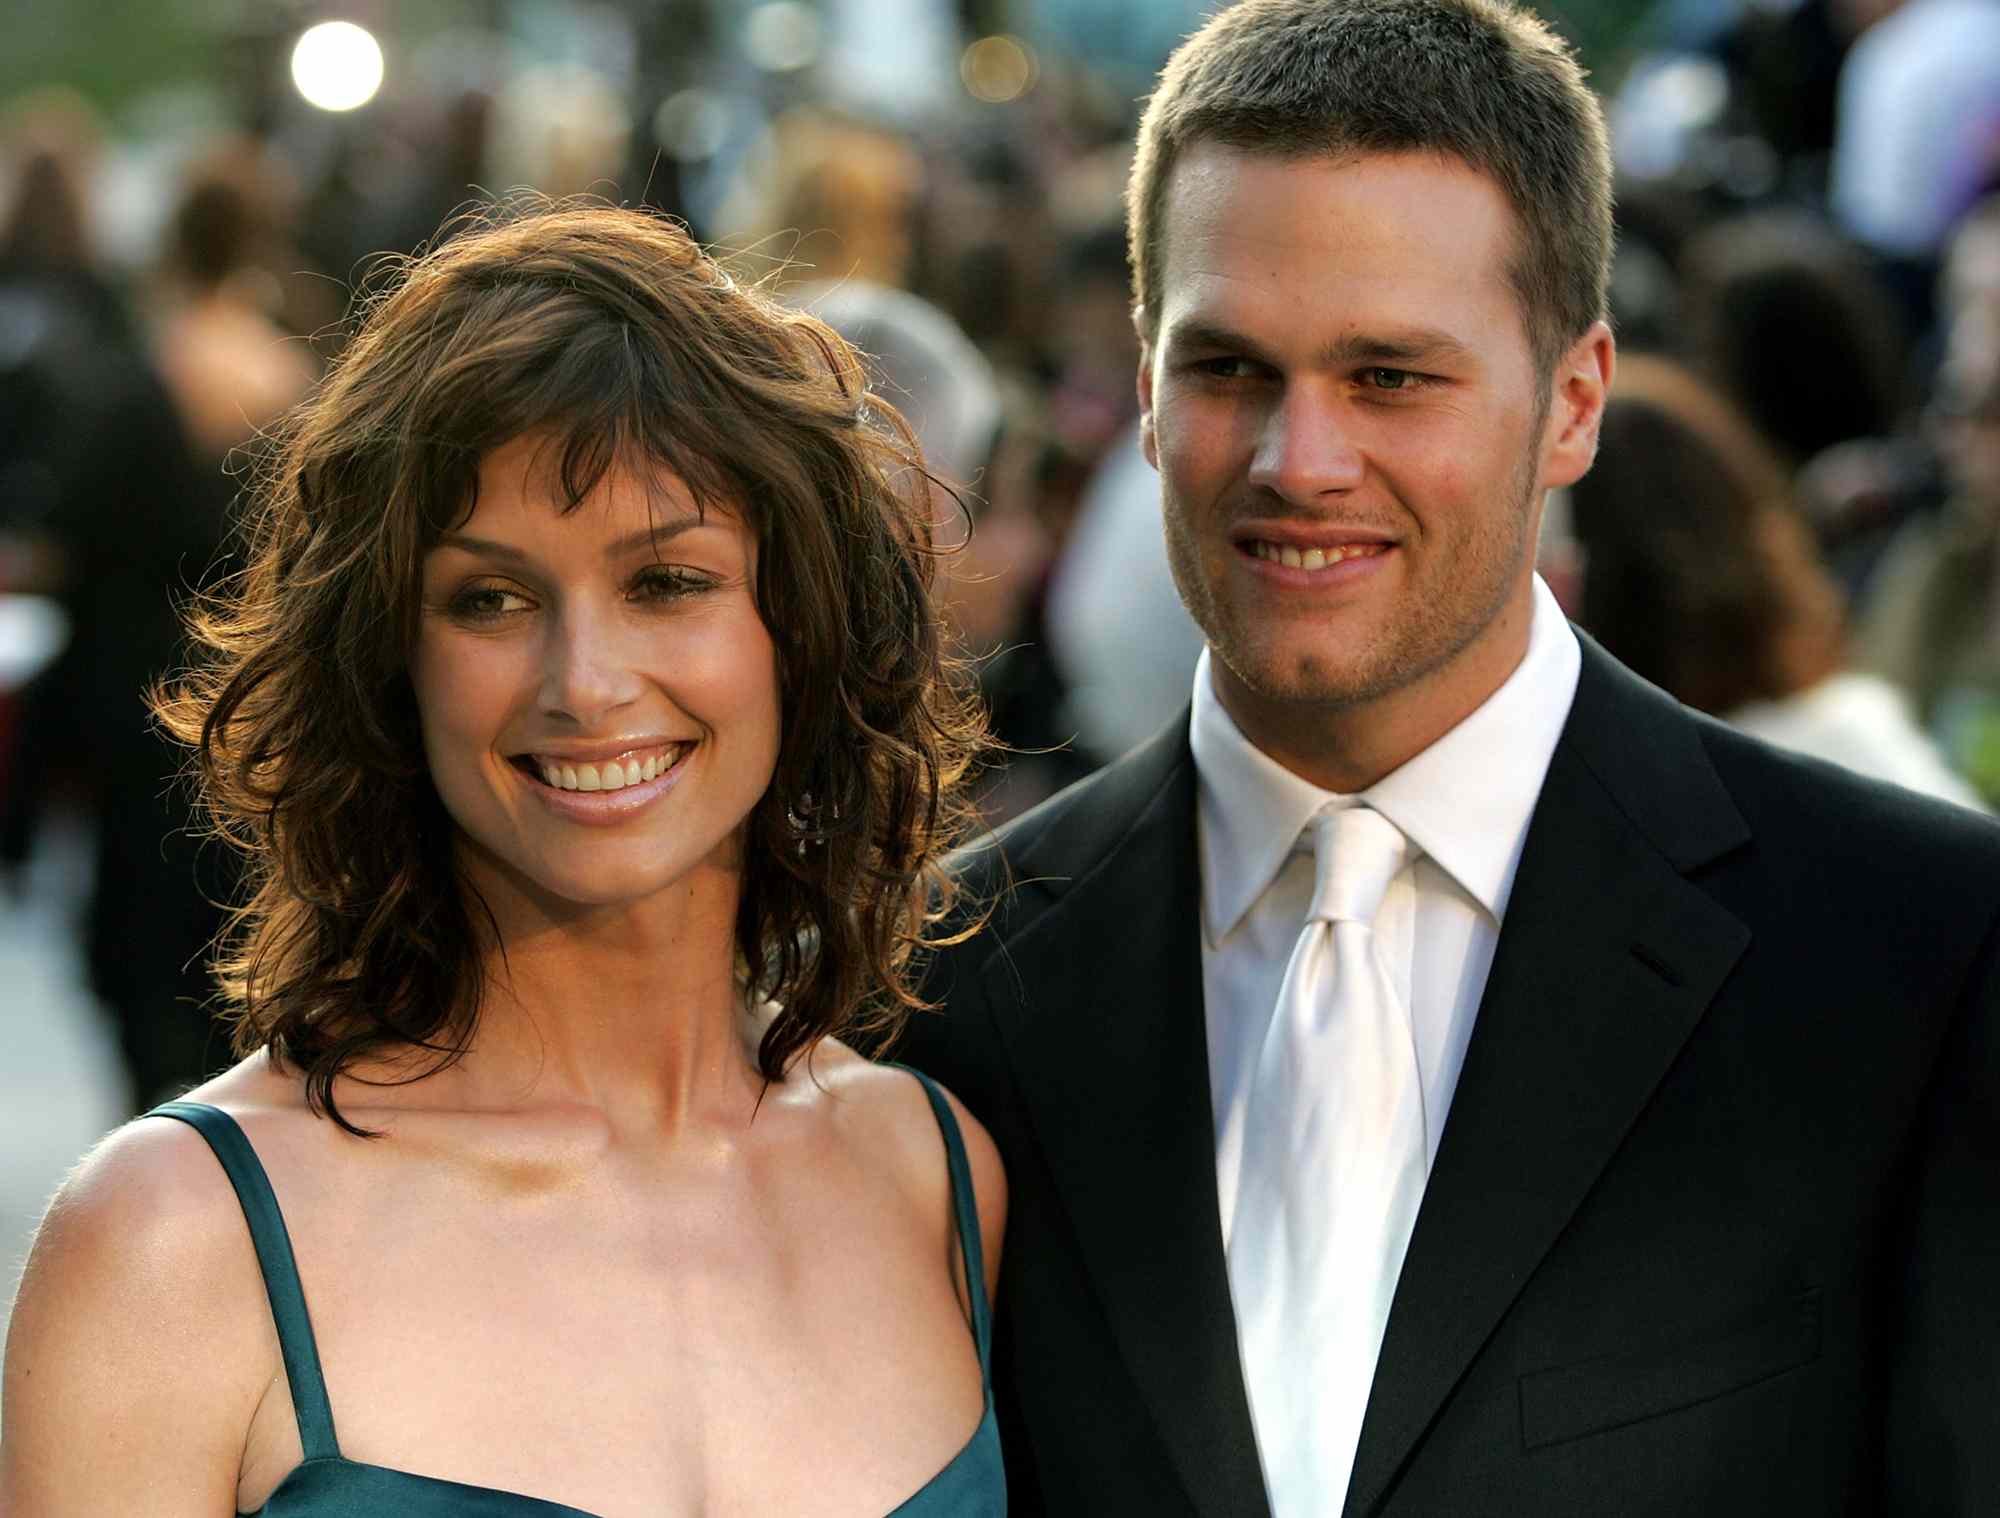 Bridget Moynahan Shares Quote About 'Loyal People' After Tom Brady Was Roasted for Leaving Her While Pregnant